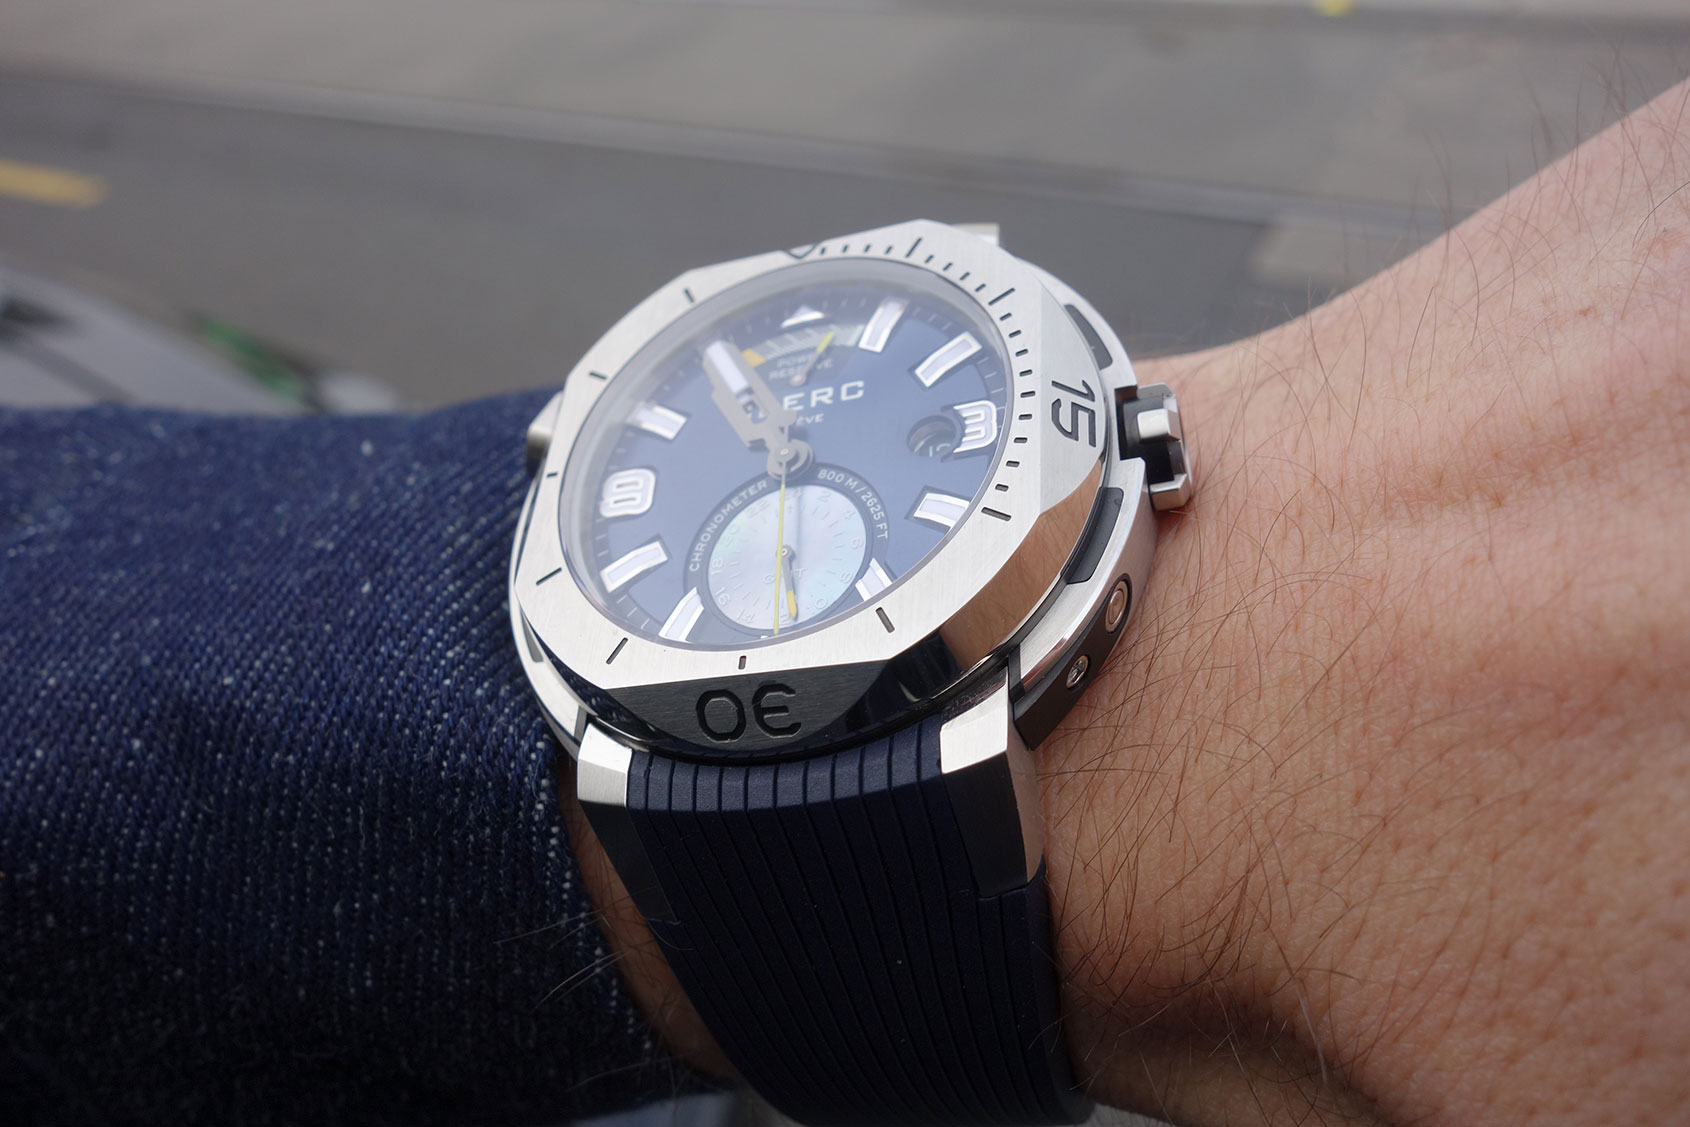 Clerc Hydroscaph GMT Power Reserve – Hands-on Review